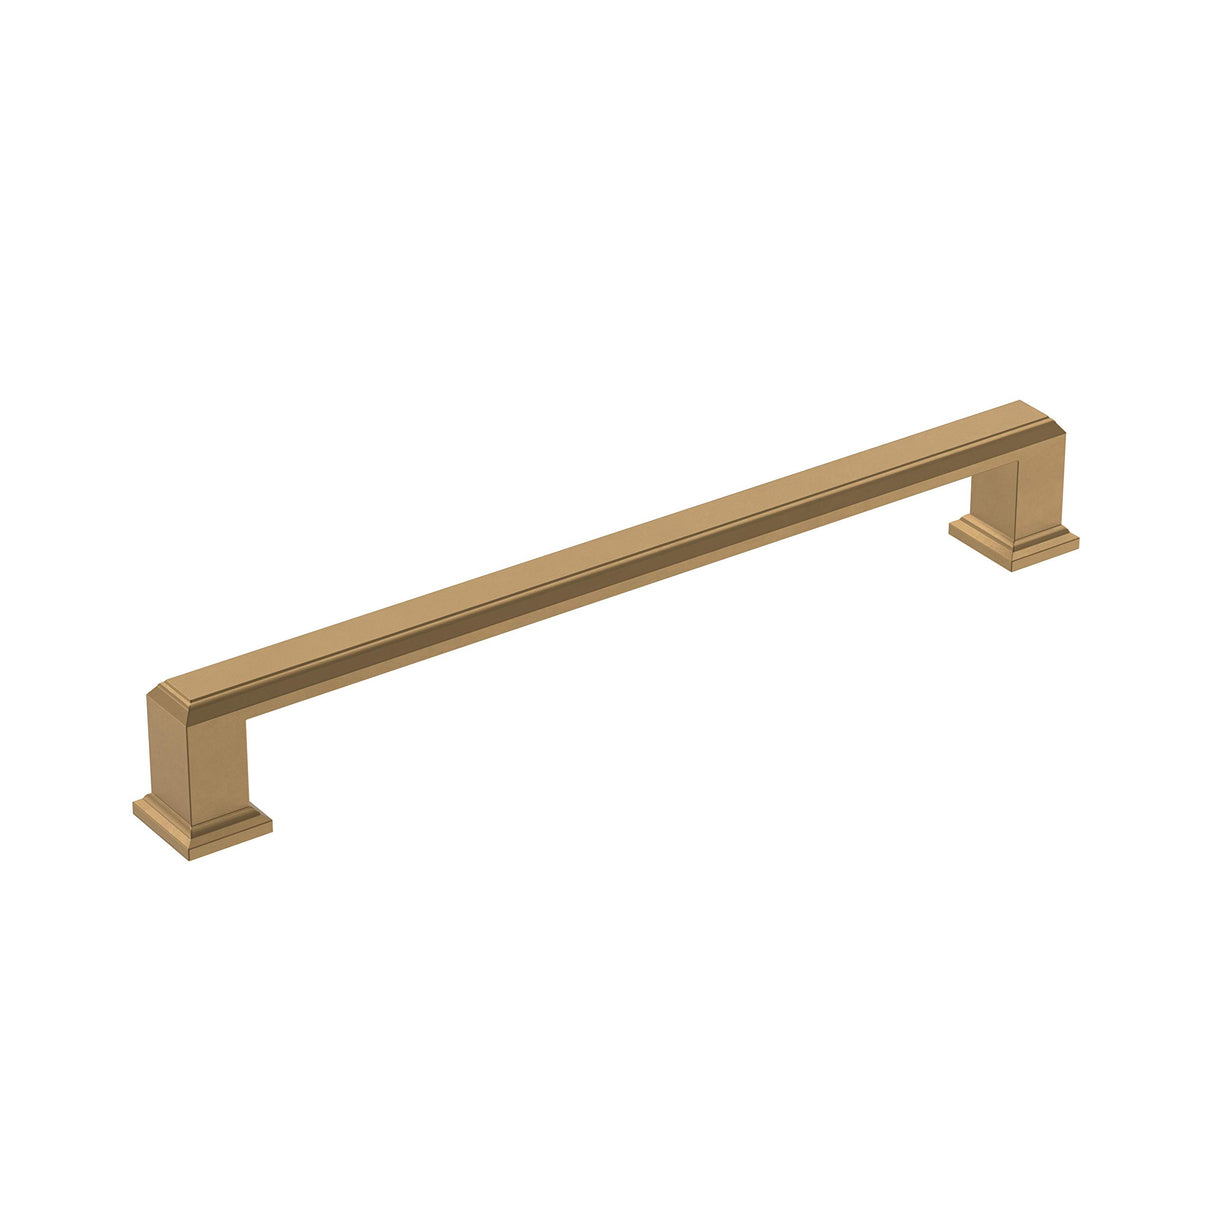 Amerock Cabinet Pull Champagne Bronze 7-9/16 inch (192 mm) Center-to-Center Appoint 1 Pack Drawer Pull Cabinet Handle Cabinet Hardware